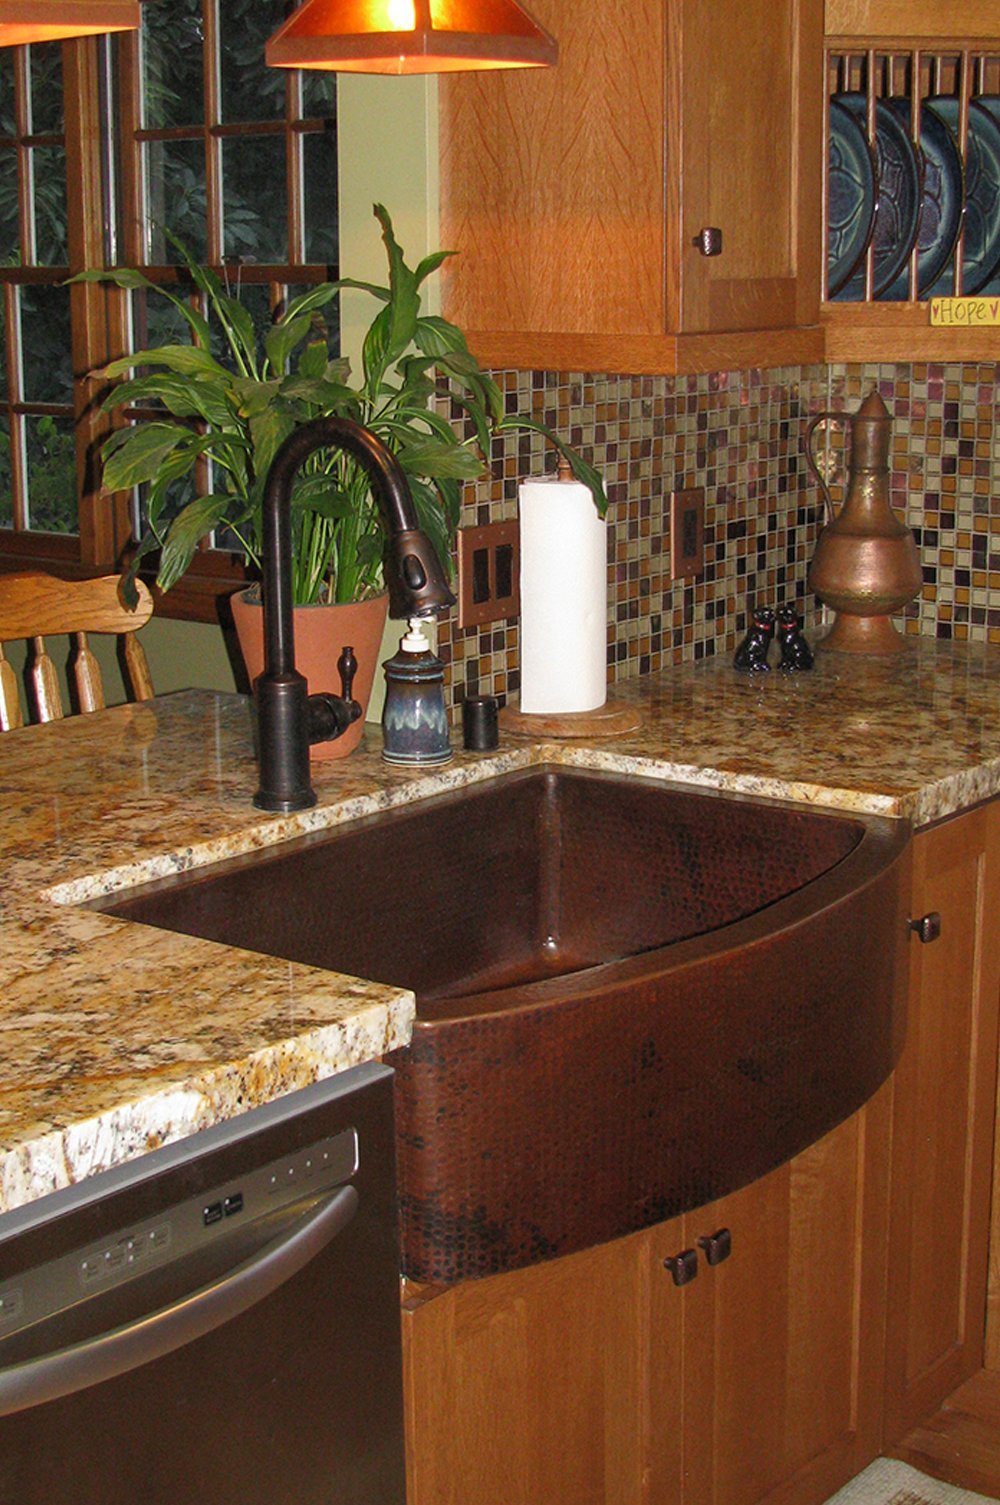 33" Hammered Copper Rounded Apron Front Single Basin Kitchen Sink - Rustic Kitchen & Bath - Kitchen Sink - Premier Copper Products